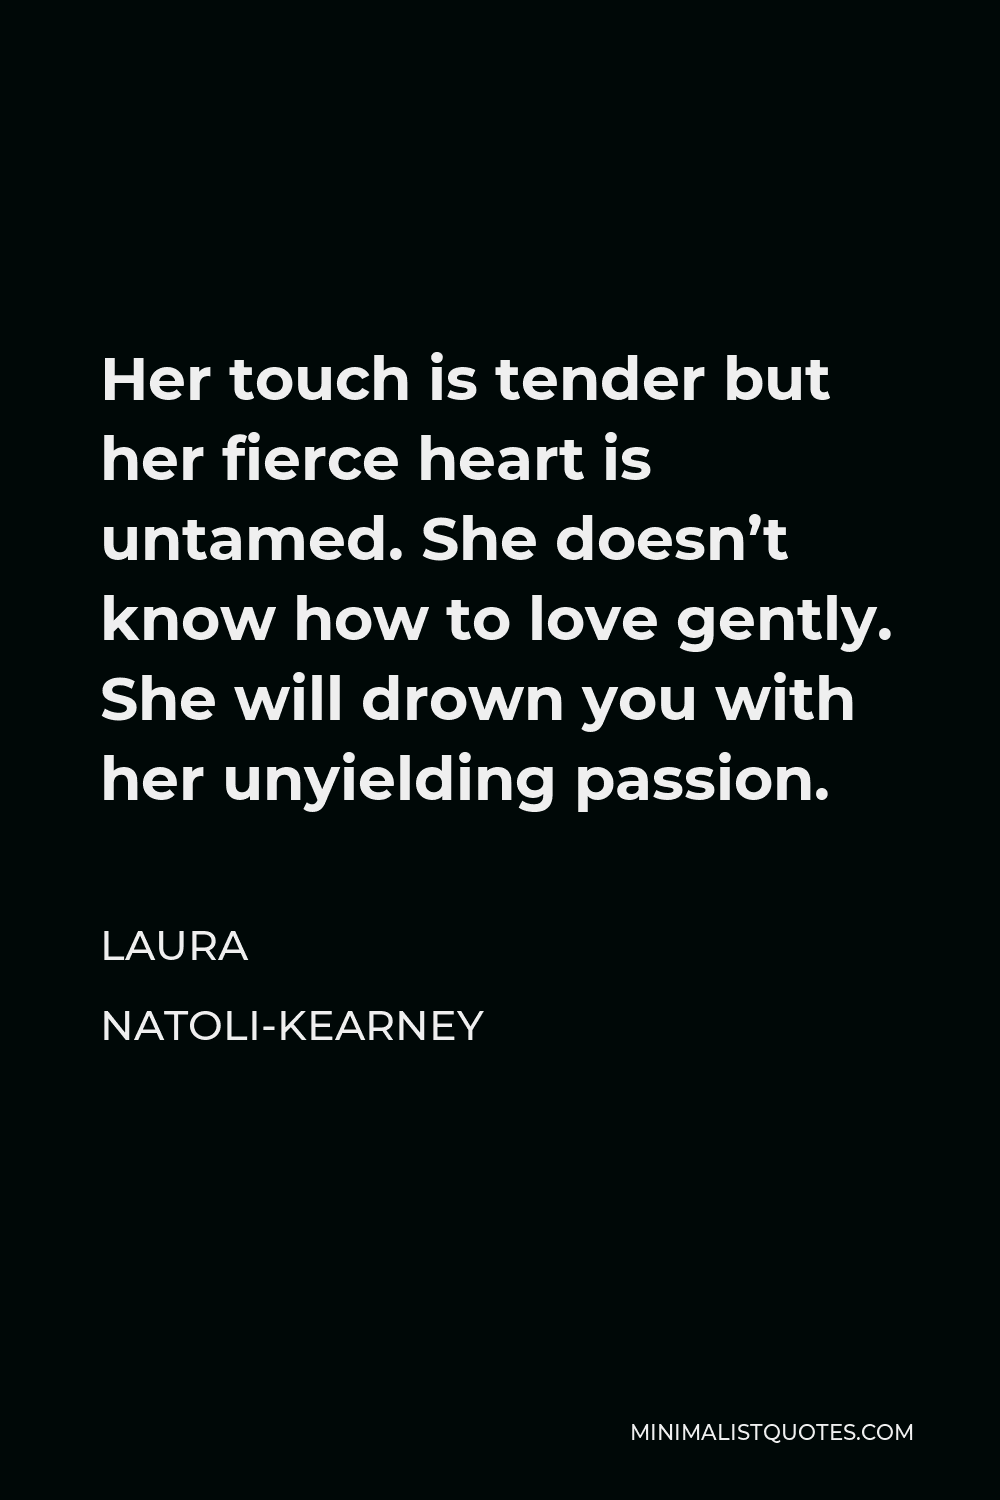 Laura Natoli-Kearney Quote - Her touch is tender but her fierce heart is untamed. She doesn’t know how to love gently. She will drown you with her unyielding passion.